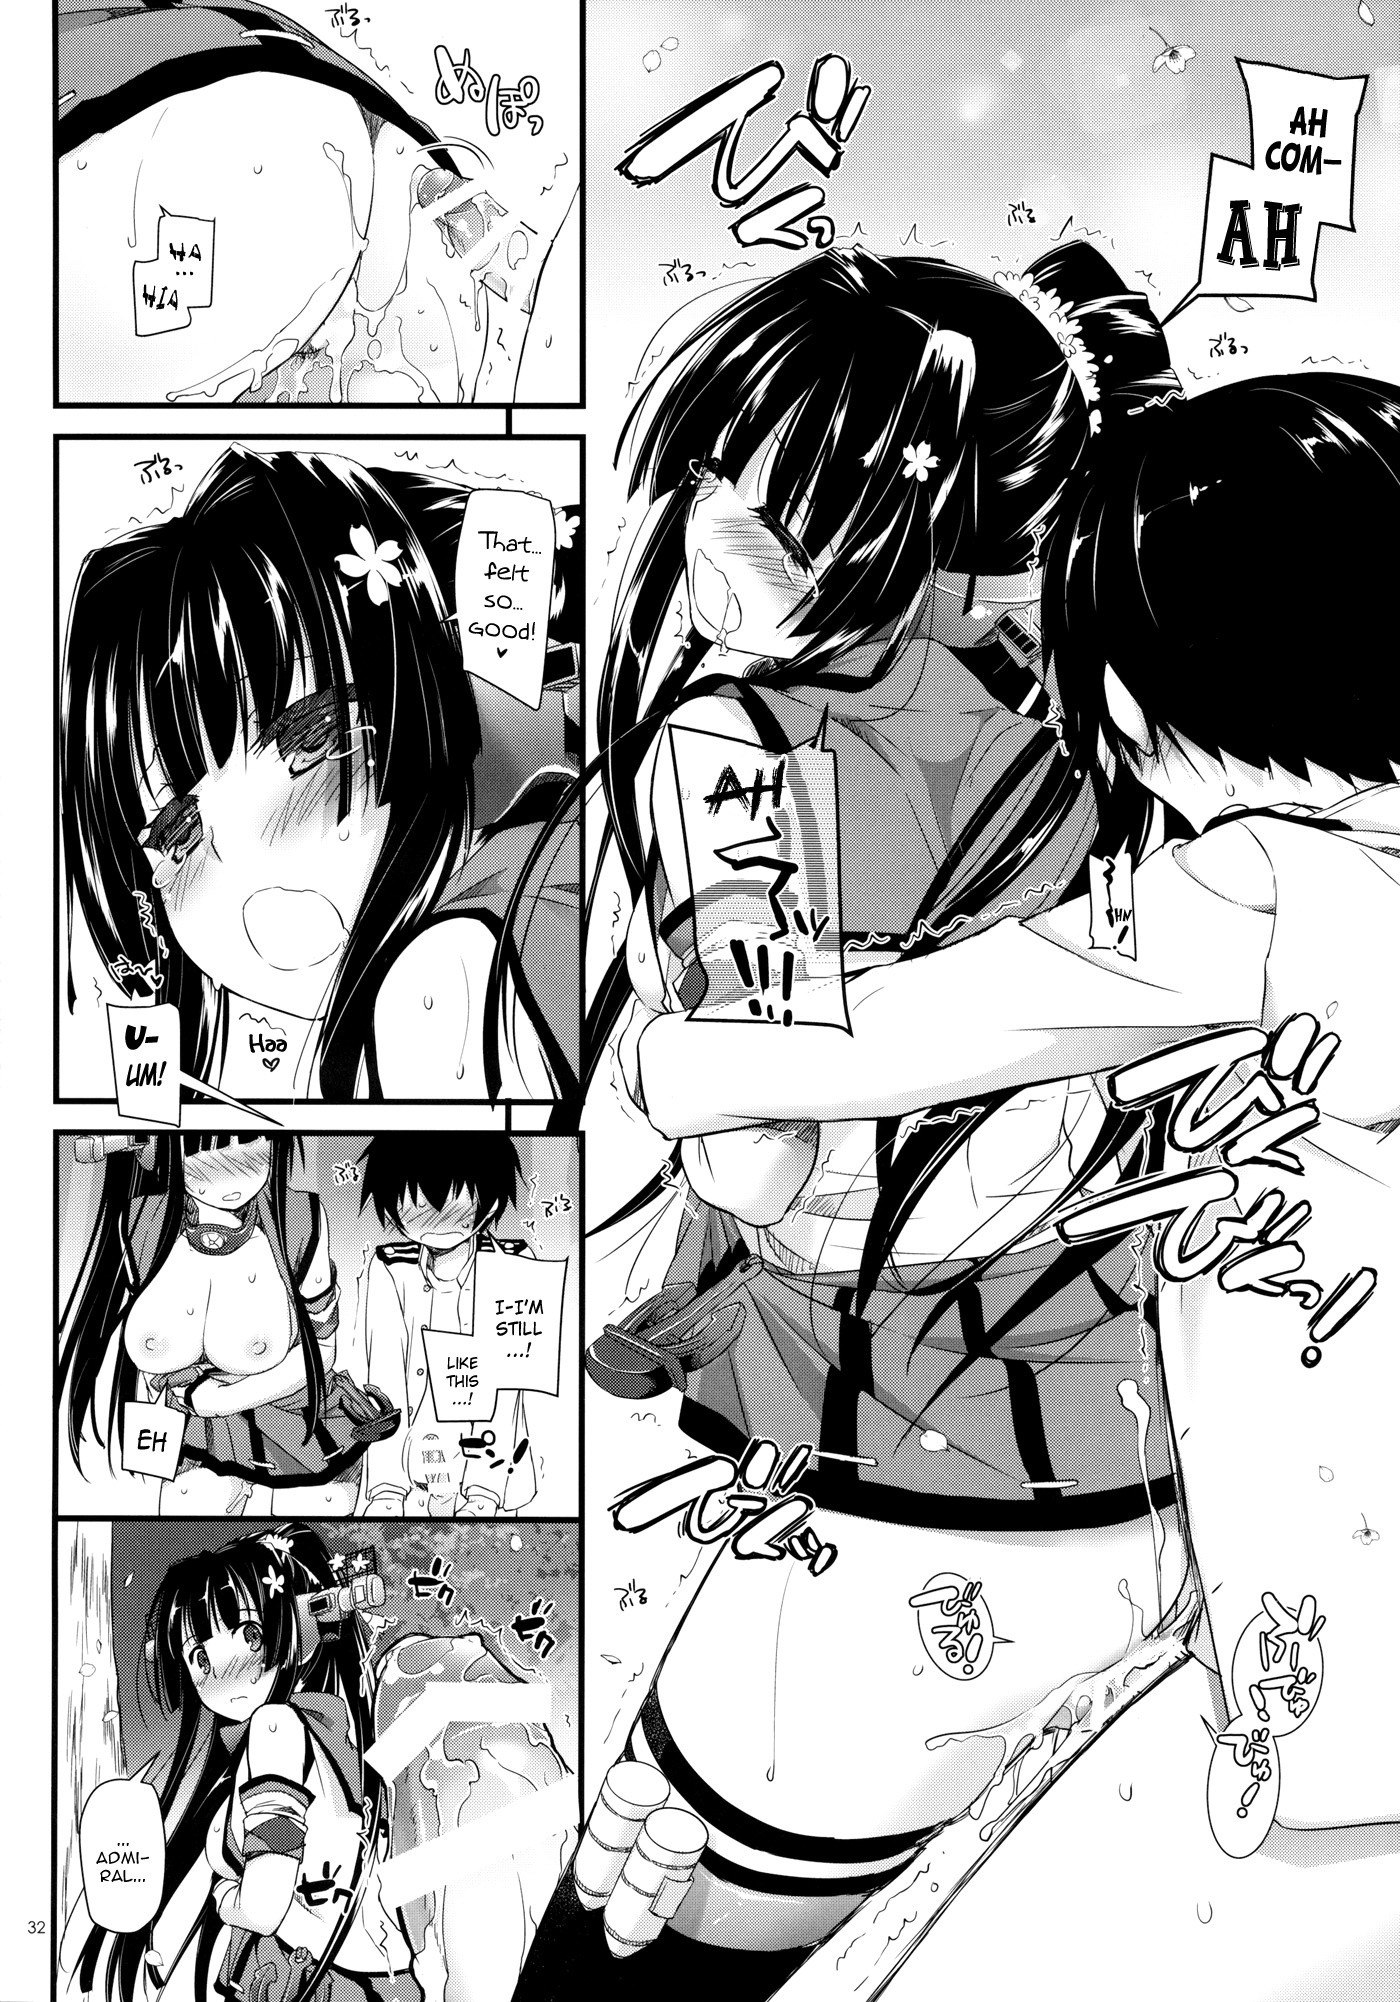 D.L. action 85 hentai manga picture 31